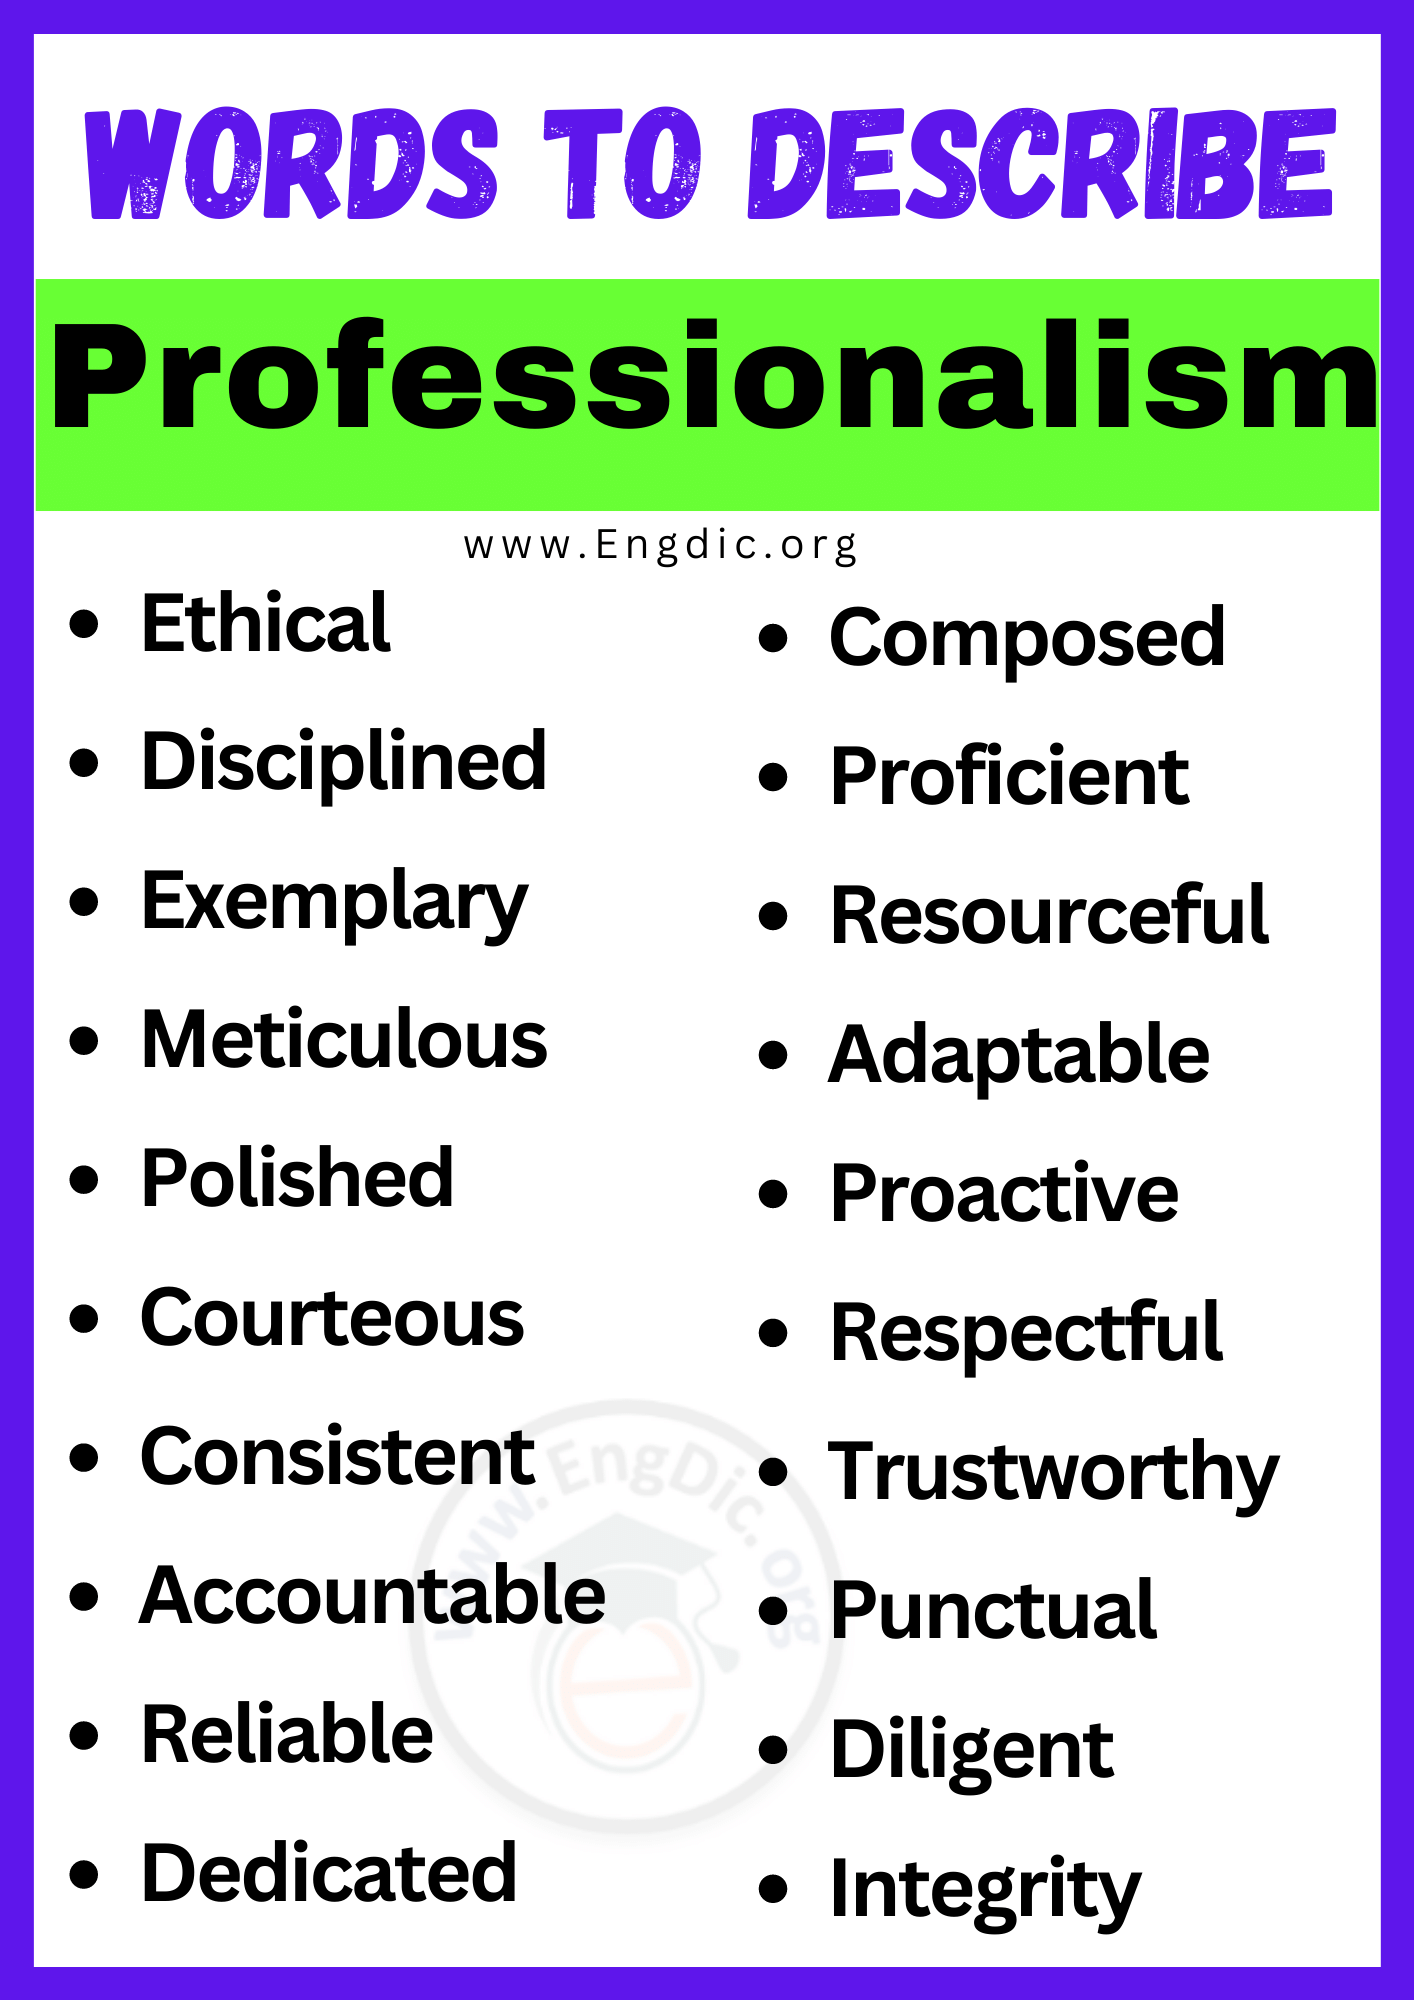 Words to Describe Professionalism